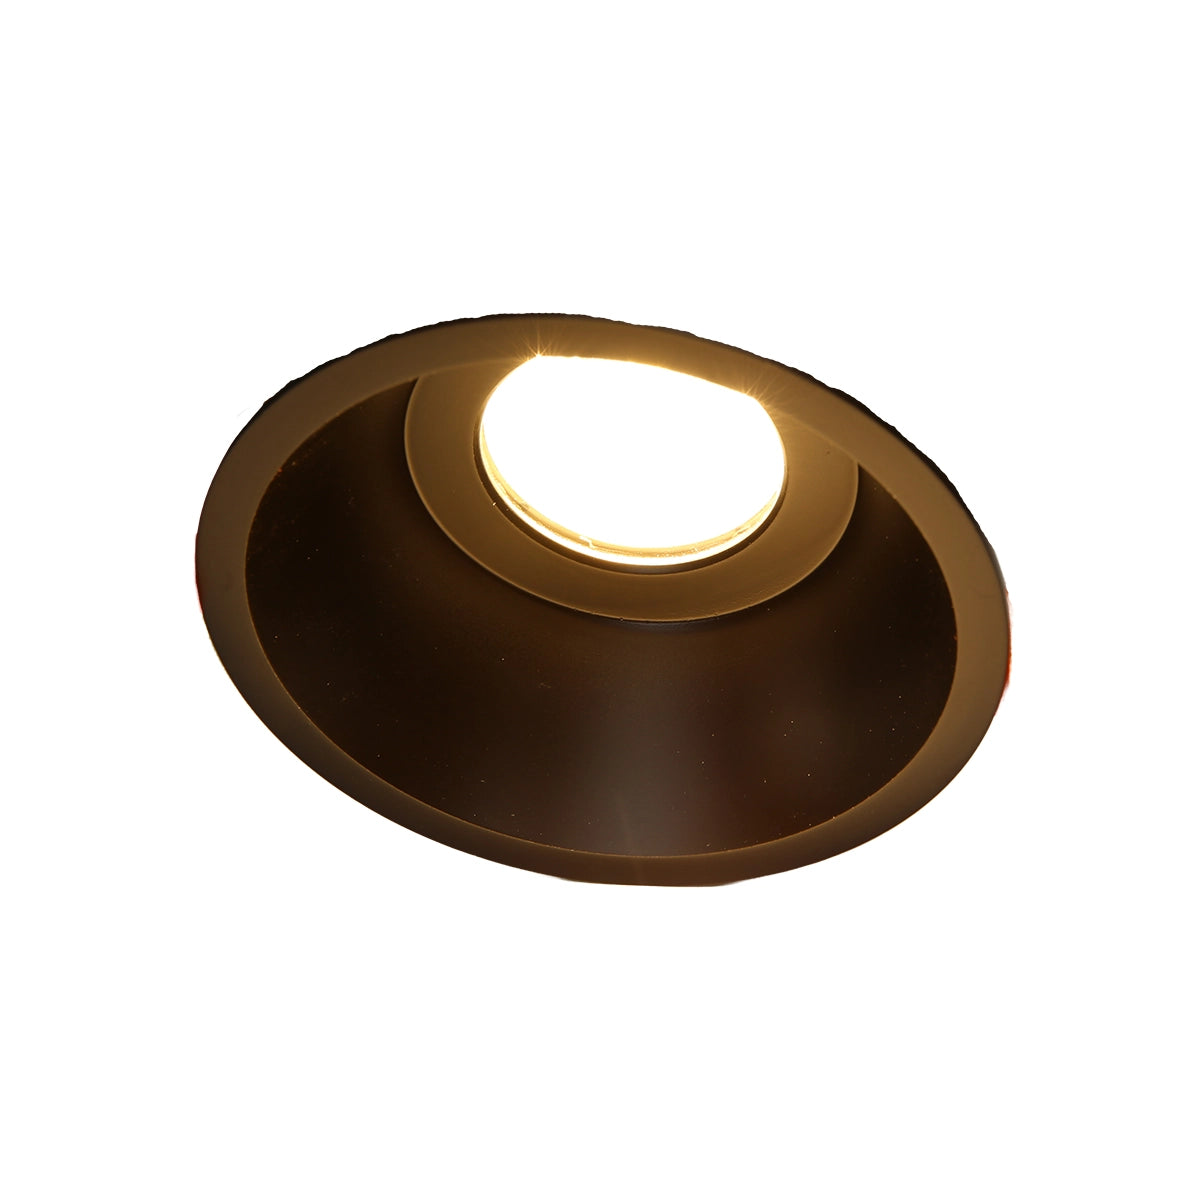 RF2 Black-Round fixed IP20 surface mount trim for X Series COB Light modules